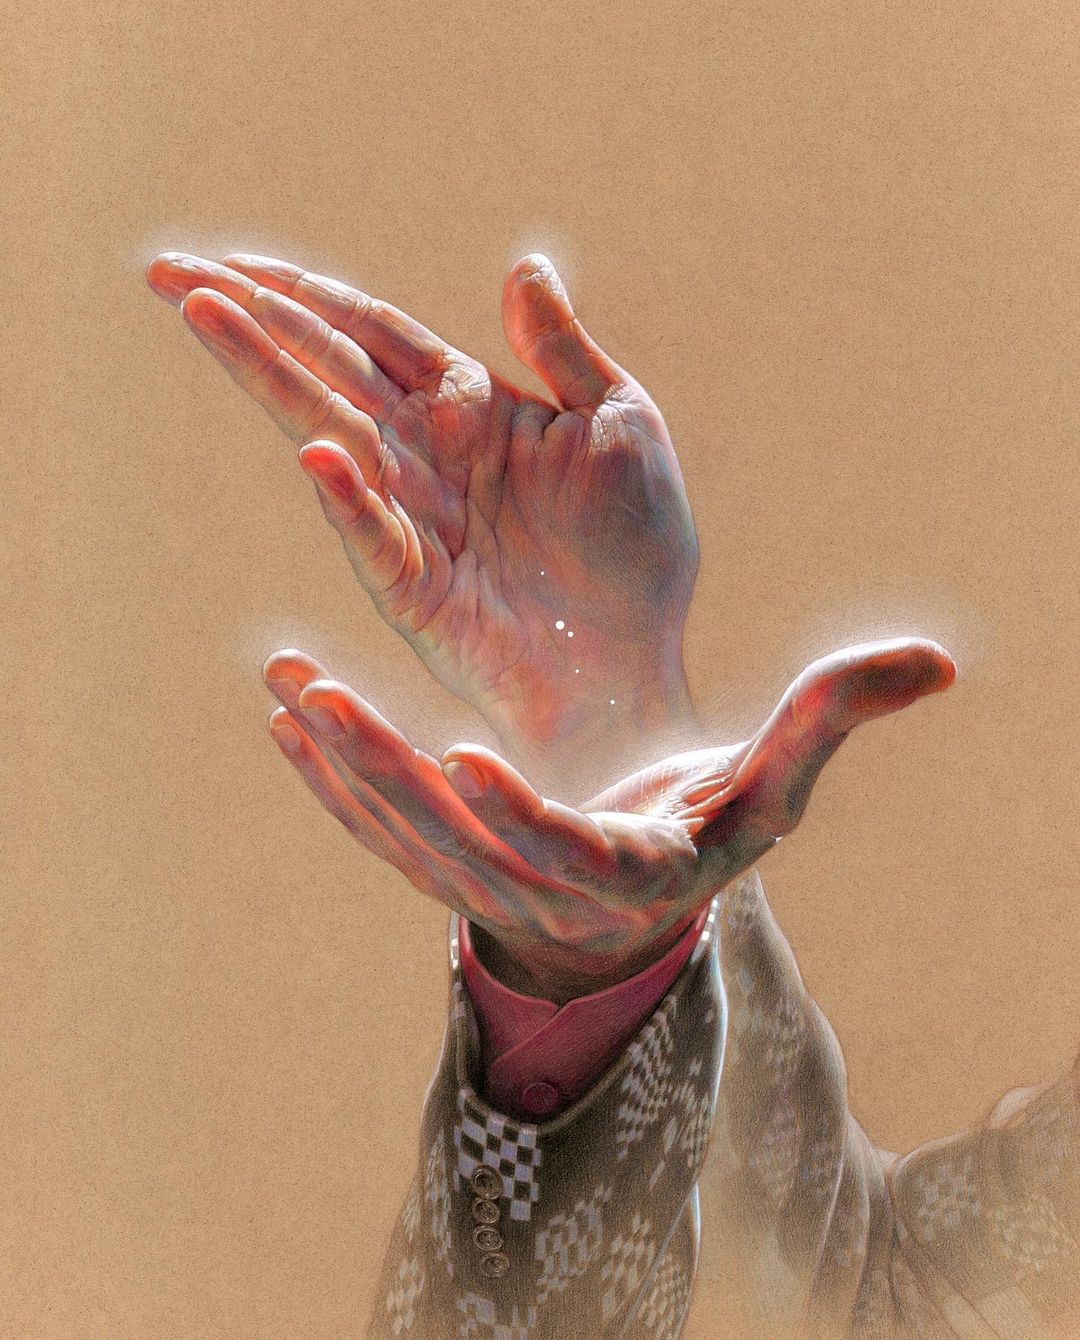 Expressive Anatomical Colored Pencil Drawings By Wanjin Gim 11